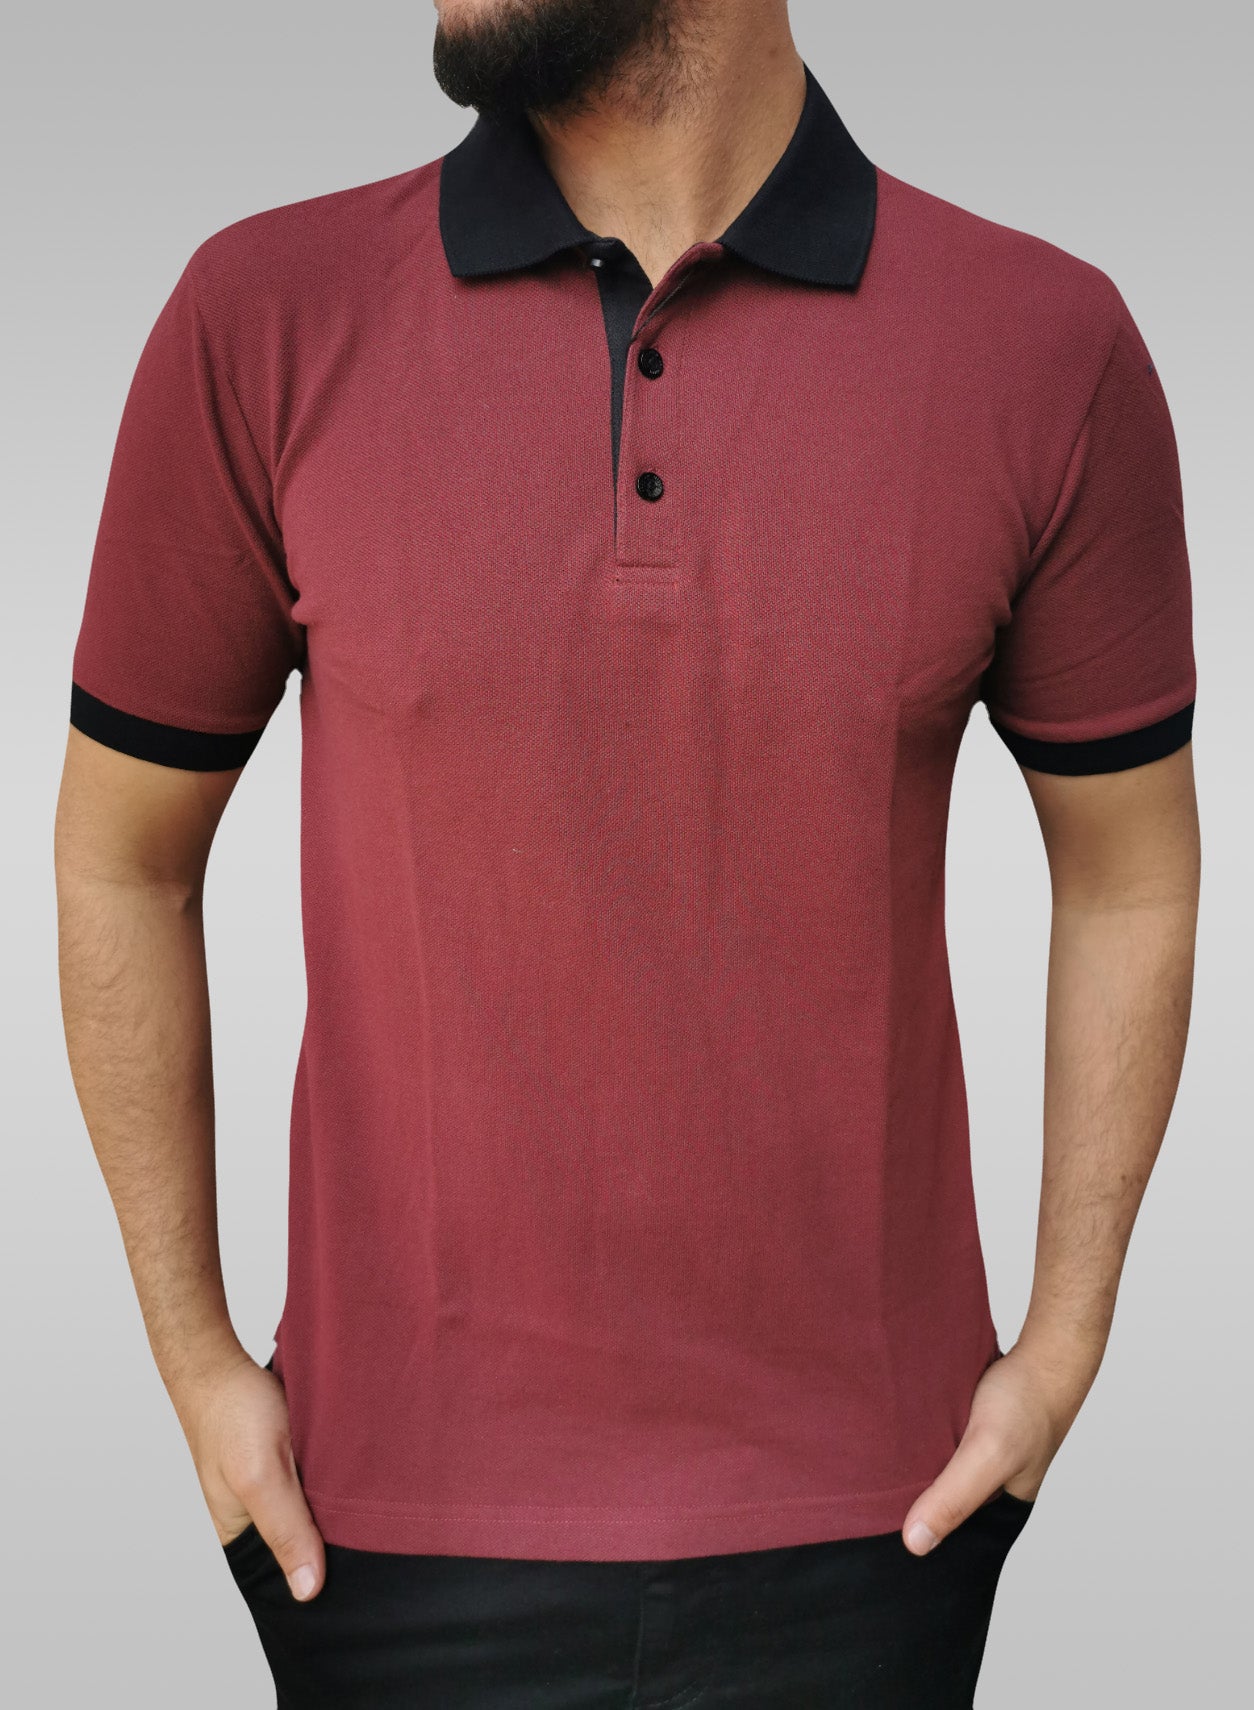 red t shirt with black collar